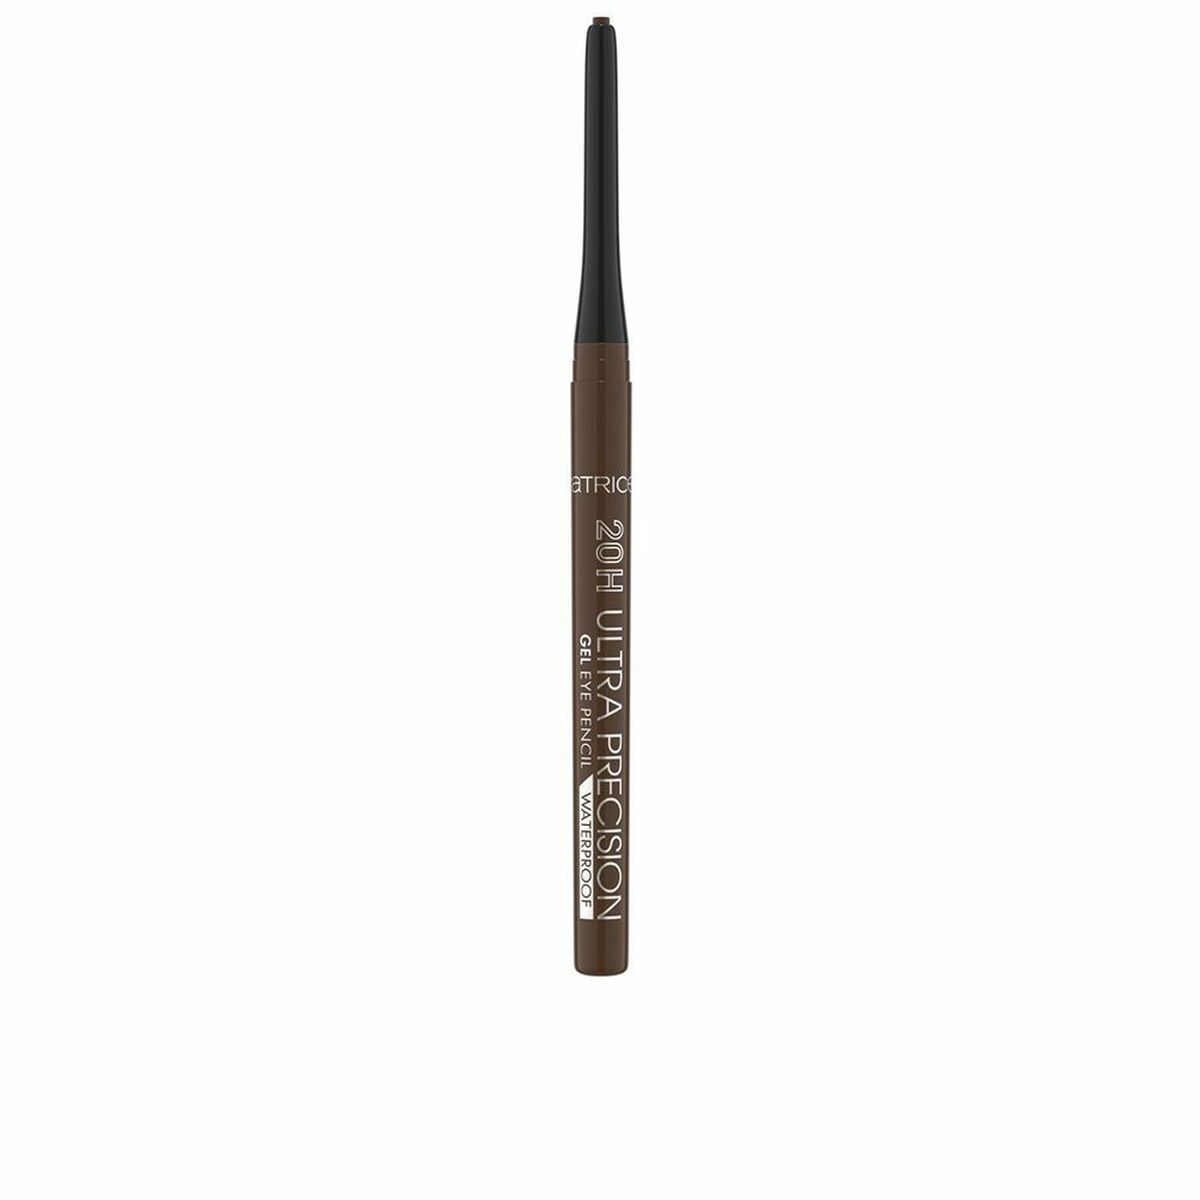 Catrice à crayons pour les yeux 10h Ultra Precision 030-BrowNIE (0,28 g)